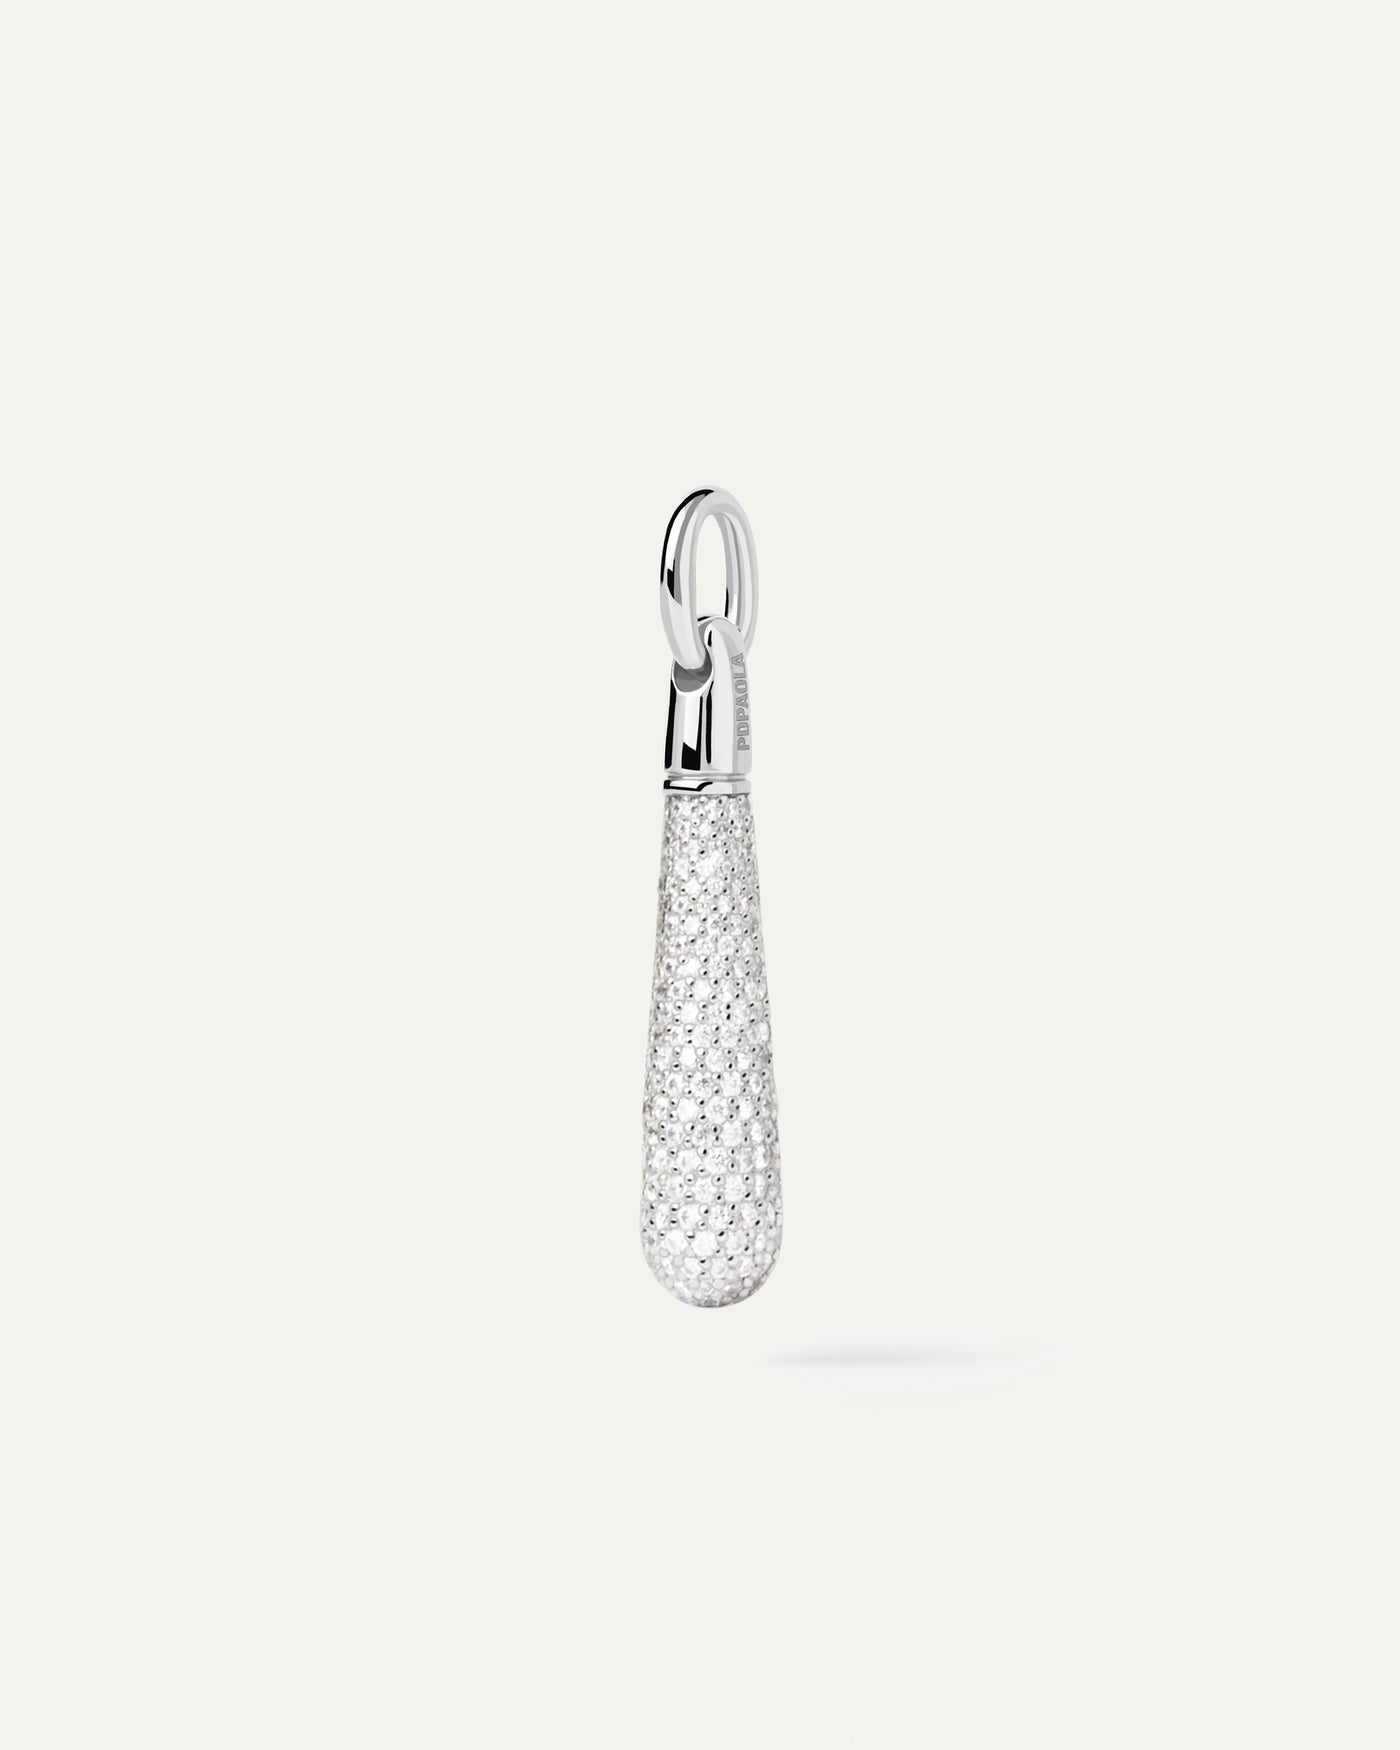 2023 Selection | Pavé Large Drop Silver Pendant. Get the latest arrival from PDPAOLA. Place your order safely and get this Best Seller. Free Shipping.